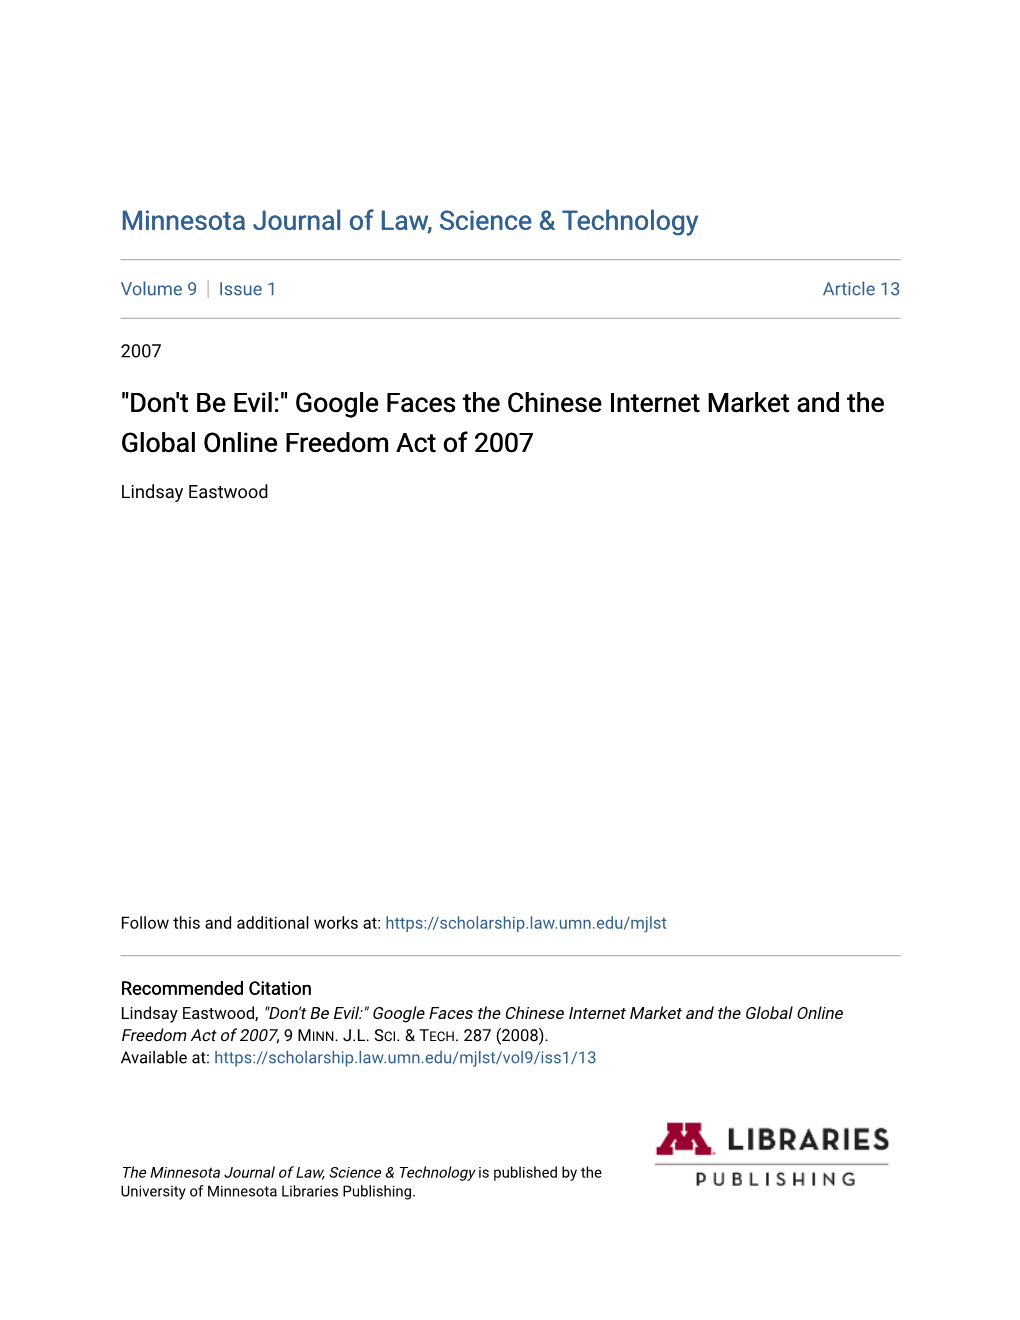 Google Faces the Chinese Internet Market and the Global Online Freedom Act of 2007